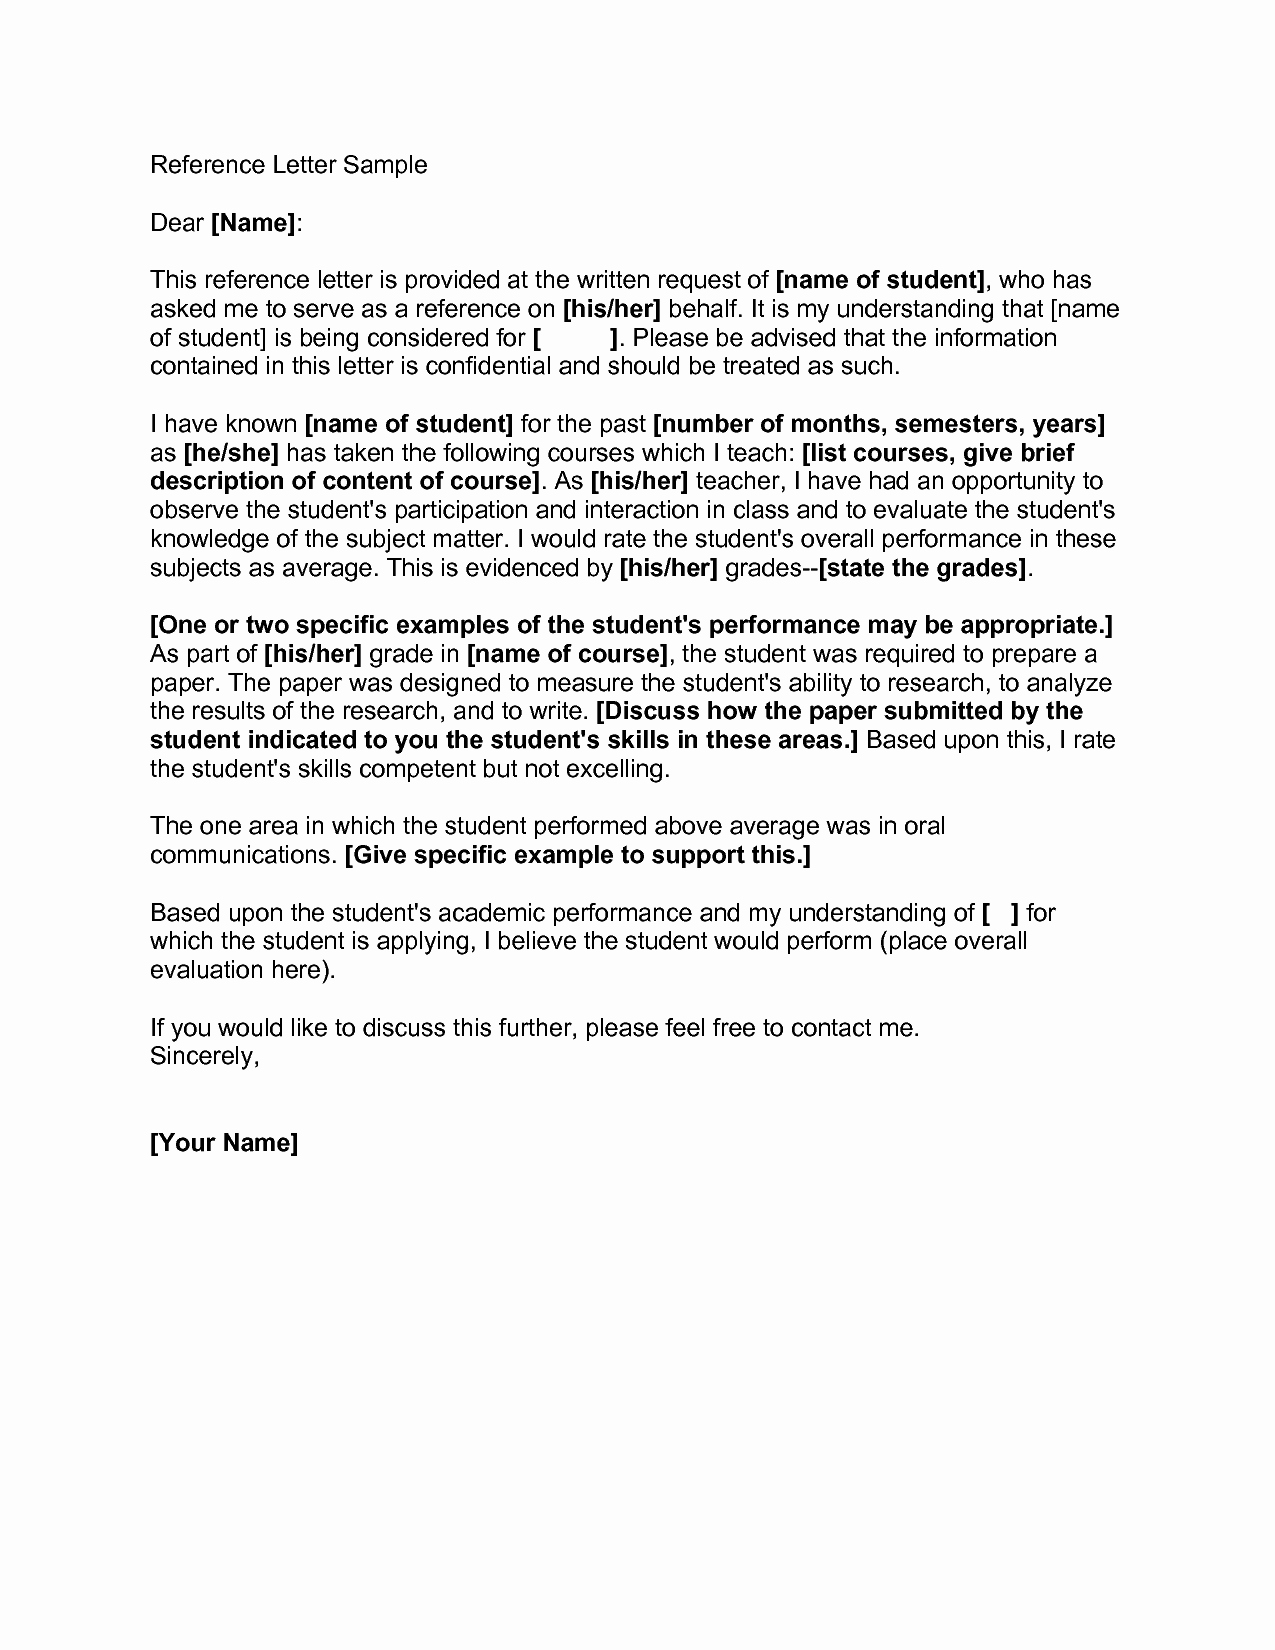 Examples Of A Reference Letter Best Of Reference Letter Samplesexamples Of Reference Letters